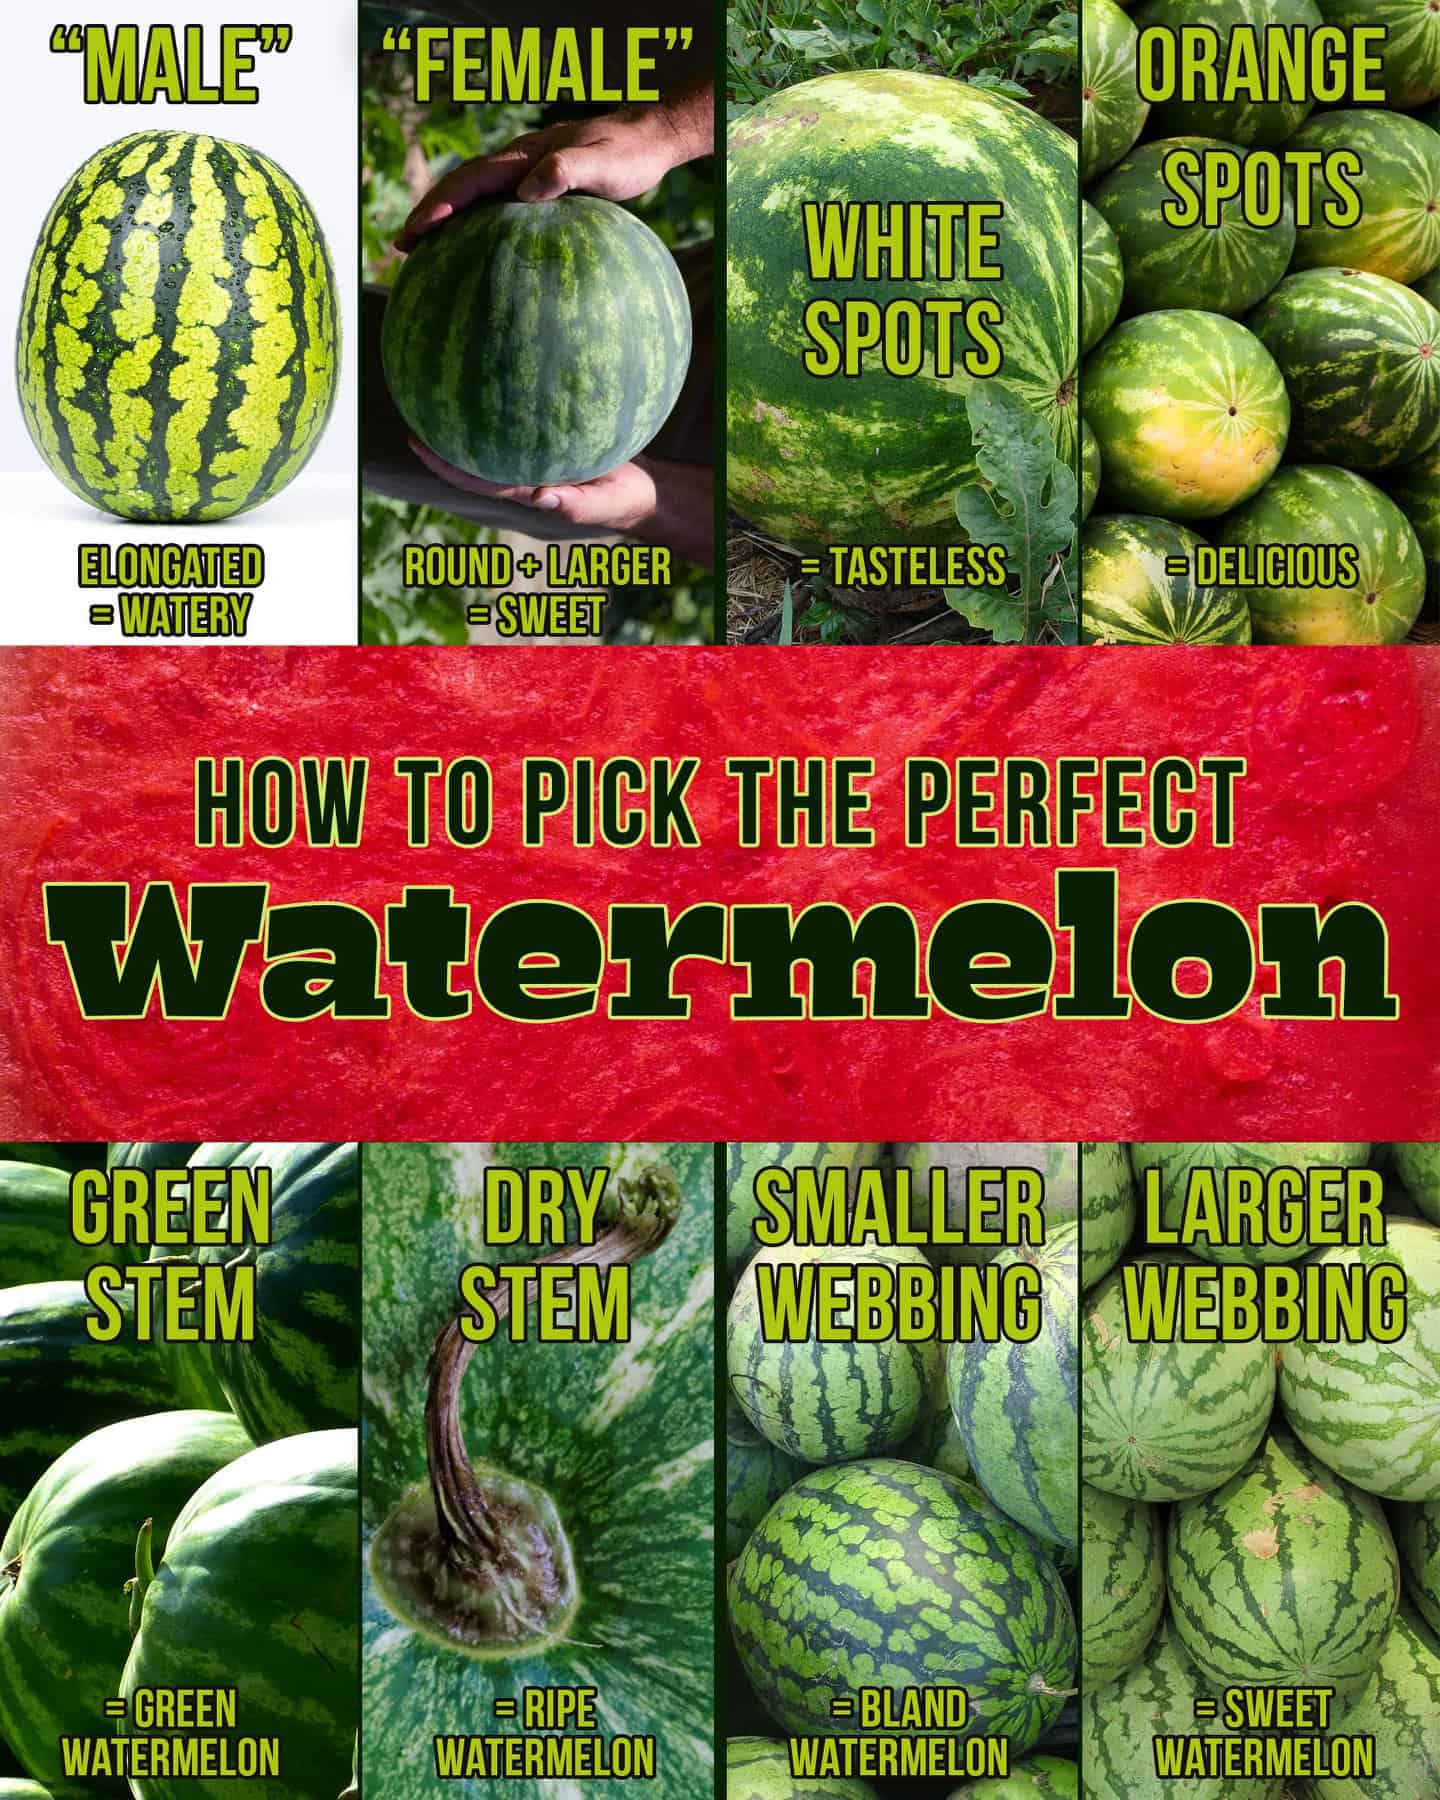 Visual guide to picking the perfect watermelon. Elongated watermelons are watery. Round watermelons are sweeter. White spots mean they are tasteless. Orange spots are delicious. Green stems mean the watermelon isn't ripe while a dry stem means it is right. Smaller webbing means the watermelon is bland while larger webbing means it is sweet.